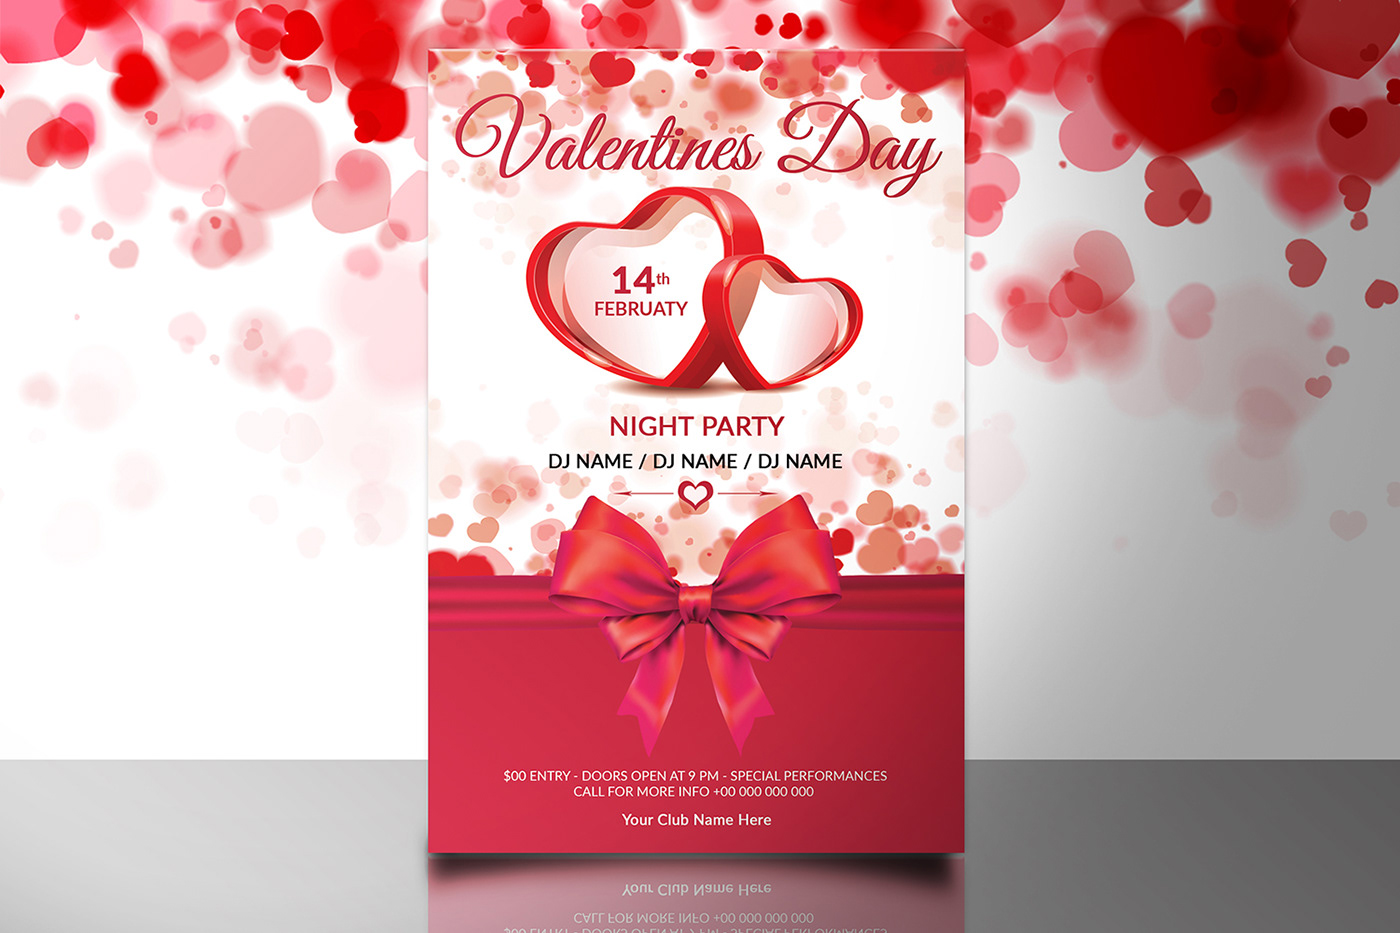 Valentine's Day party flyer Invitation Flyer template red psd ms word club valentine party heart